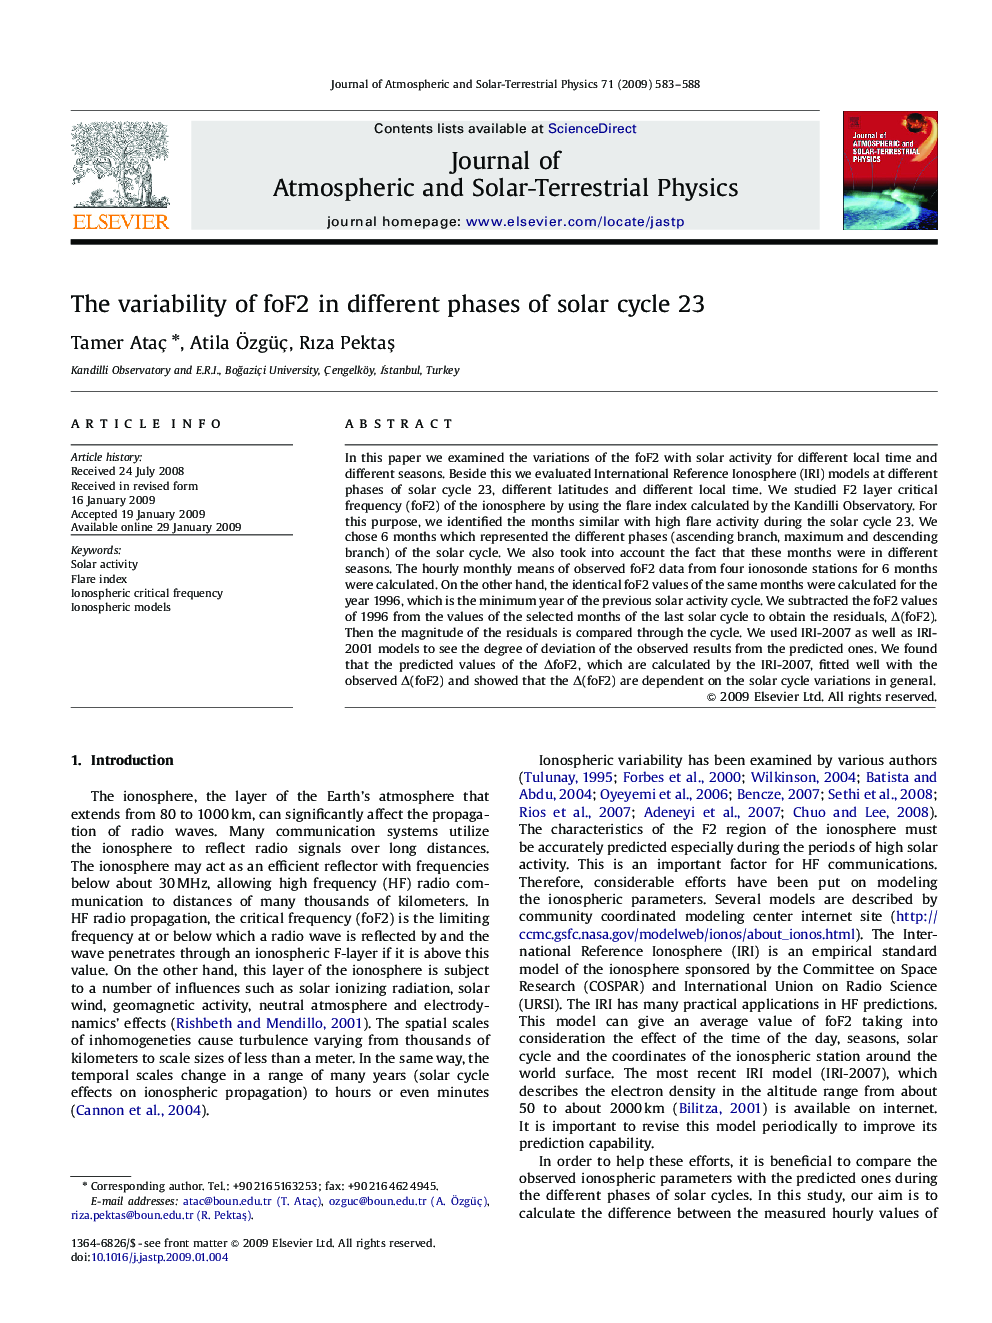 The variability of foF2 in different phases of solar cycle 23